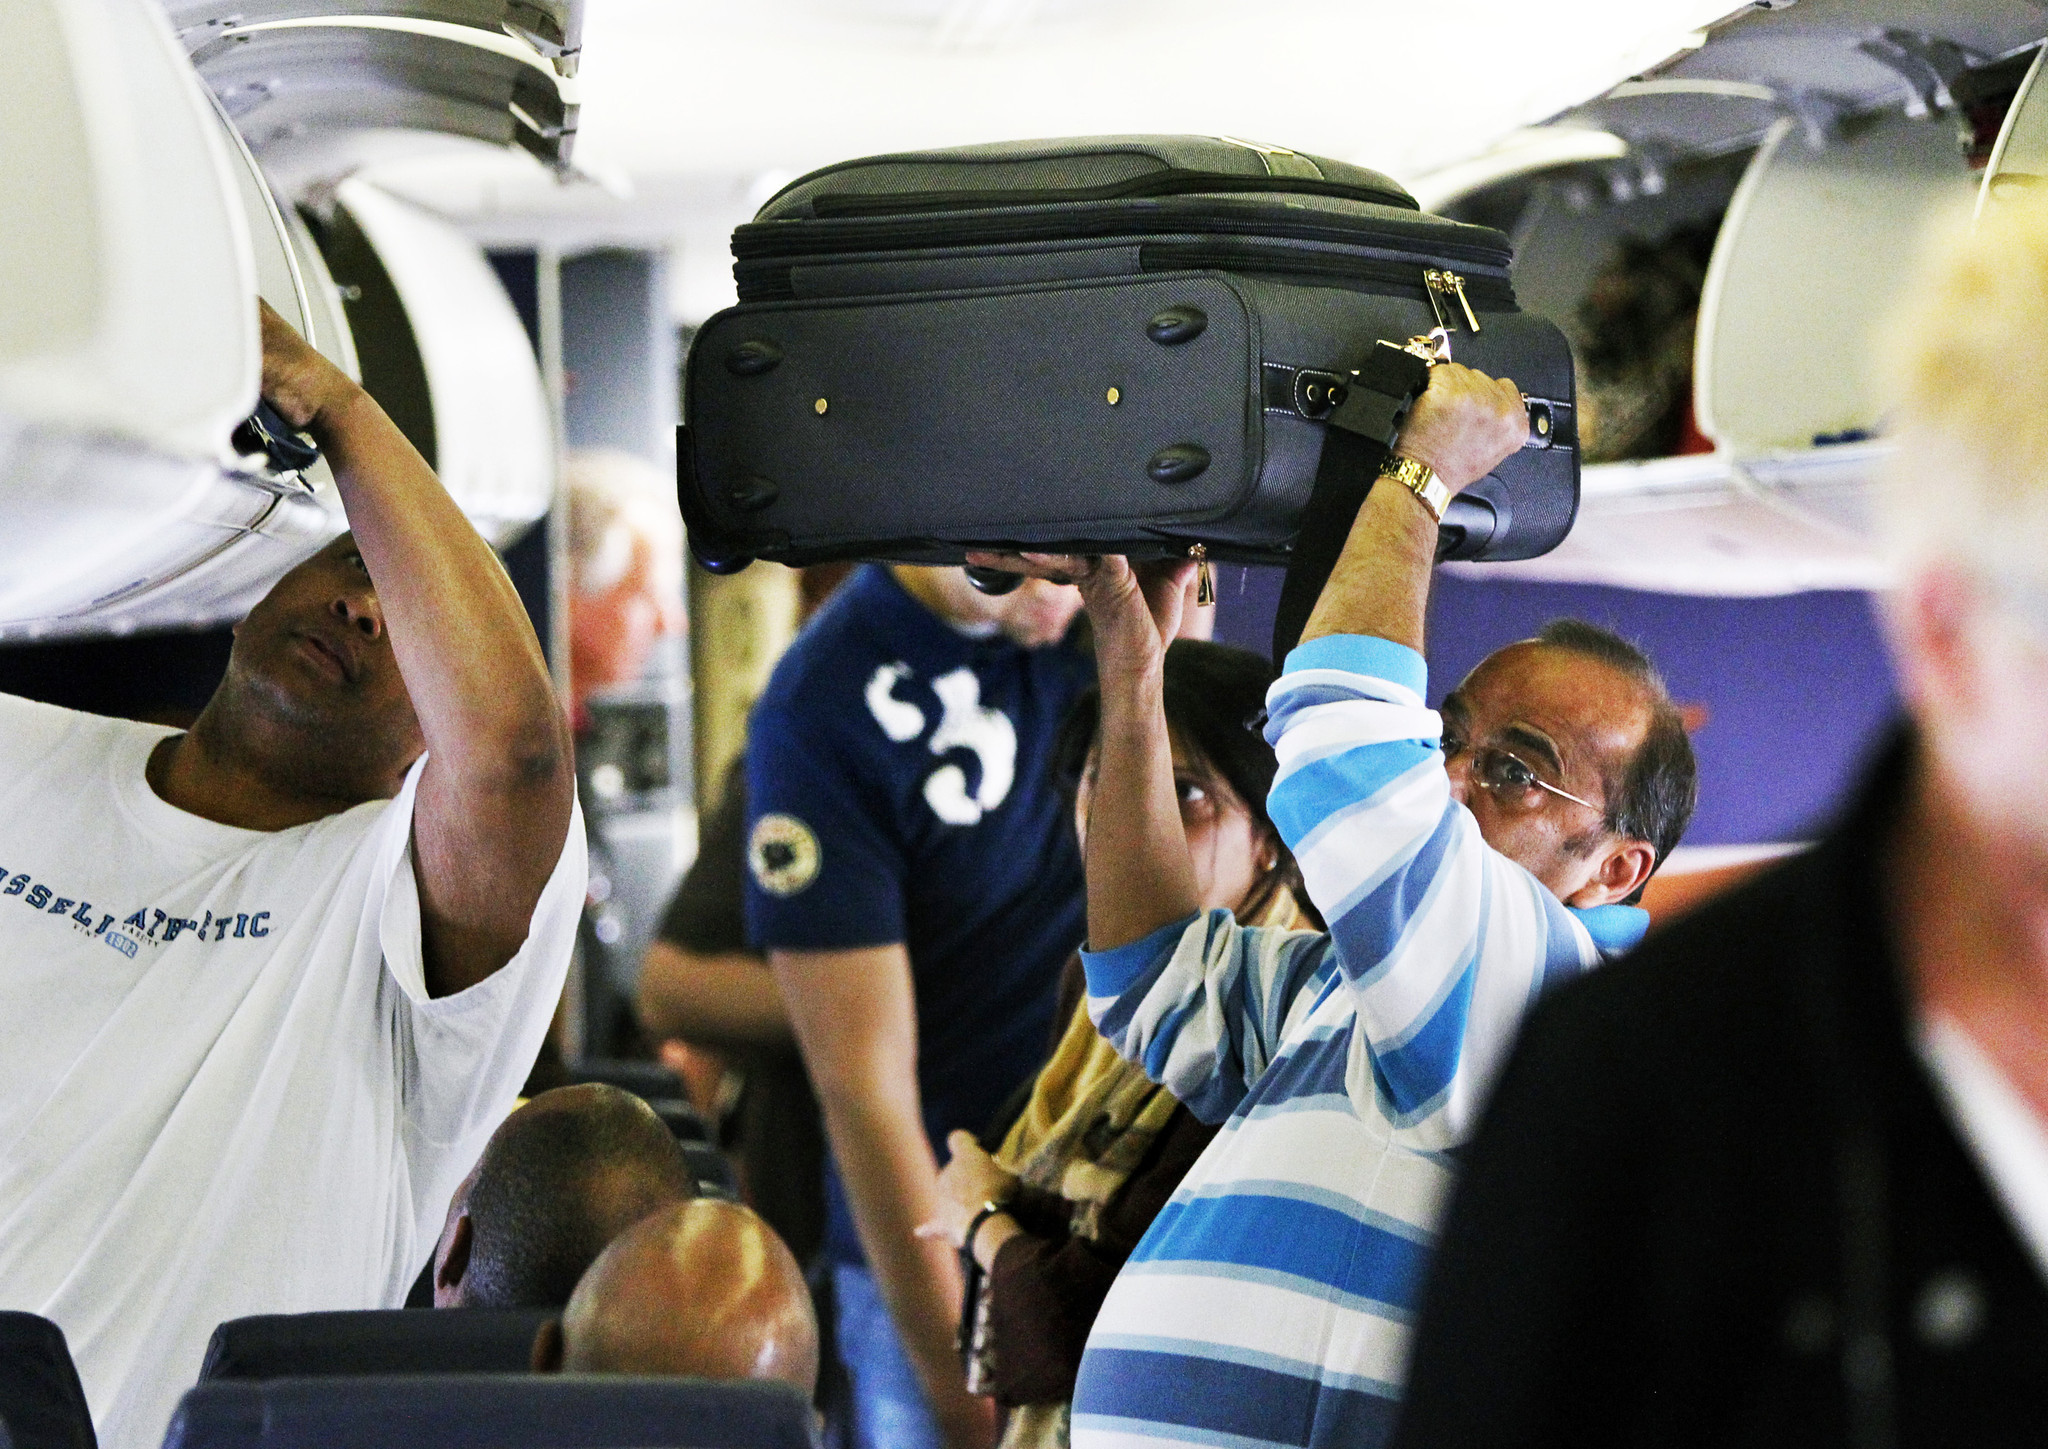 Airline group proposes smaller carry-on bags - LA Times